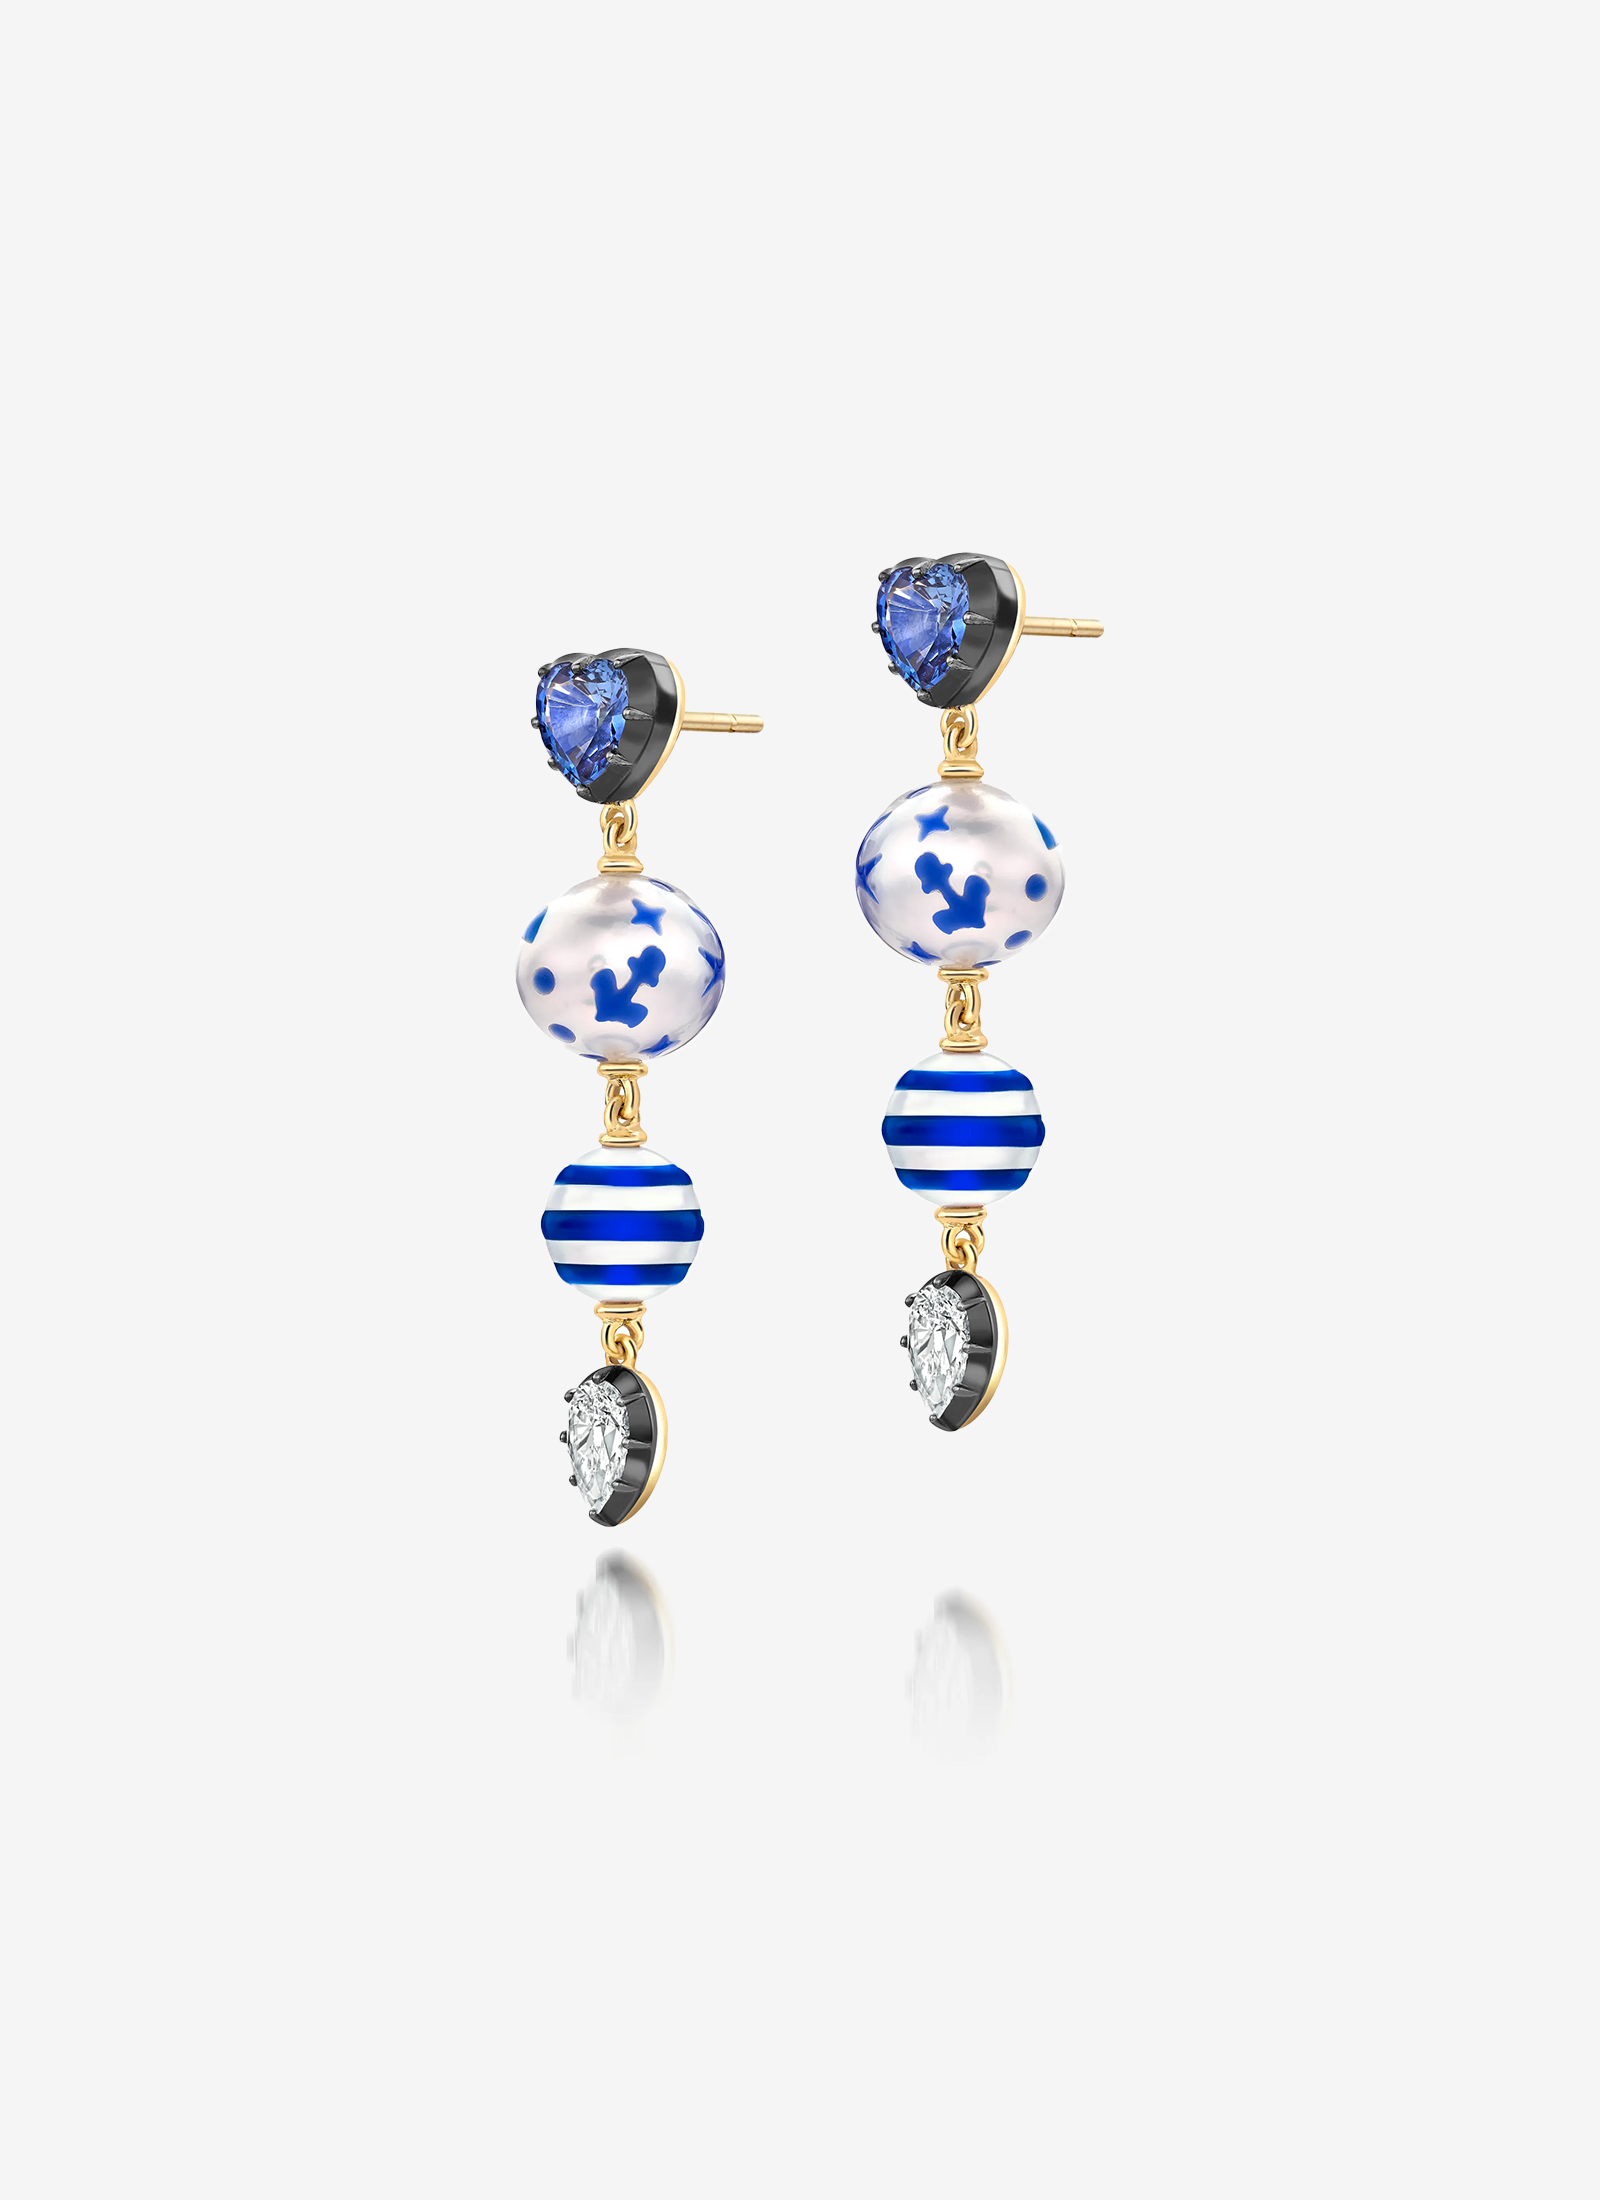 Double Pearl, Diamond and Sapphire Earrings